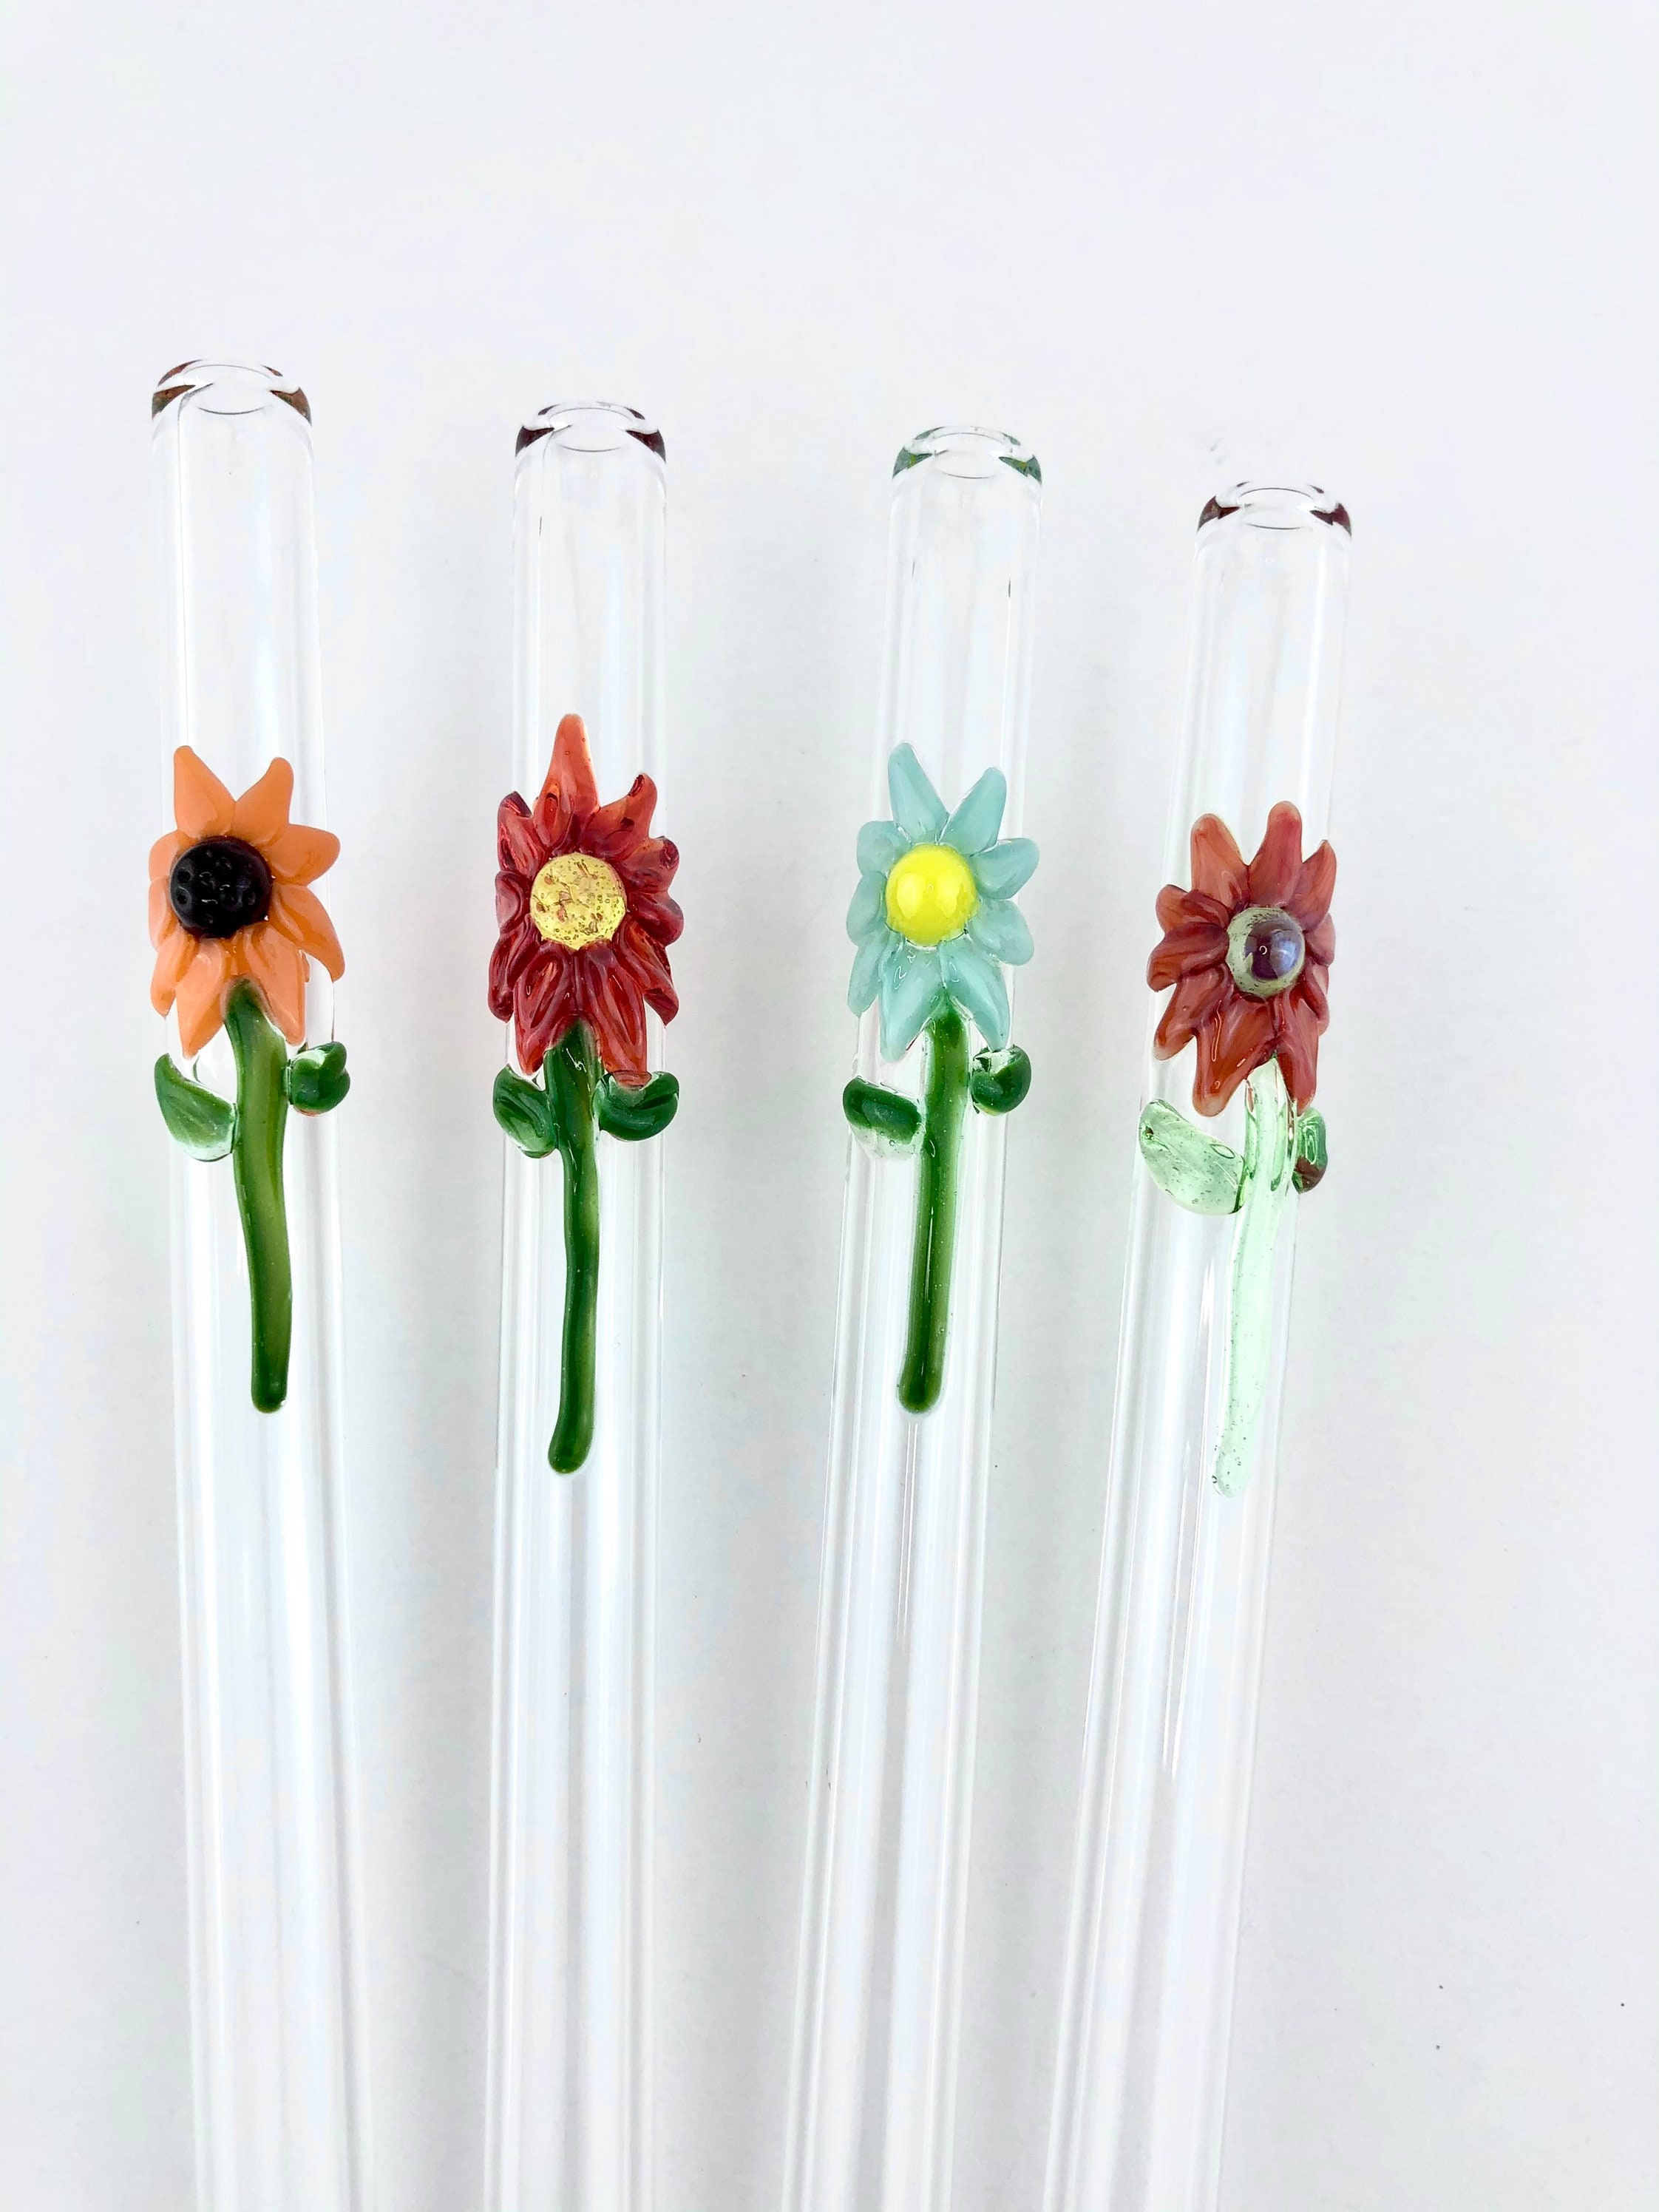 Glass Boba & Smoothie Straw – Green Life Trading Co.